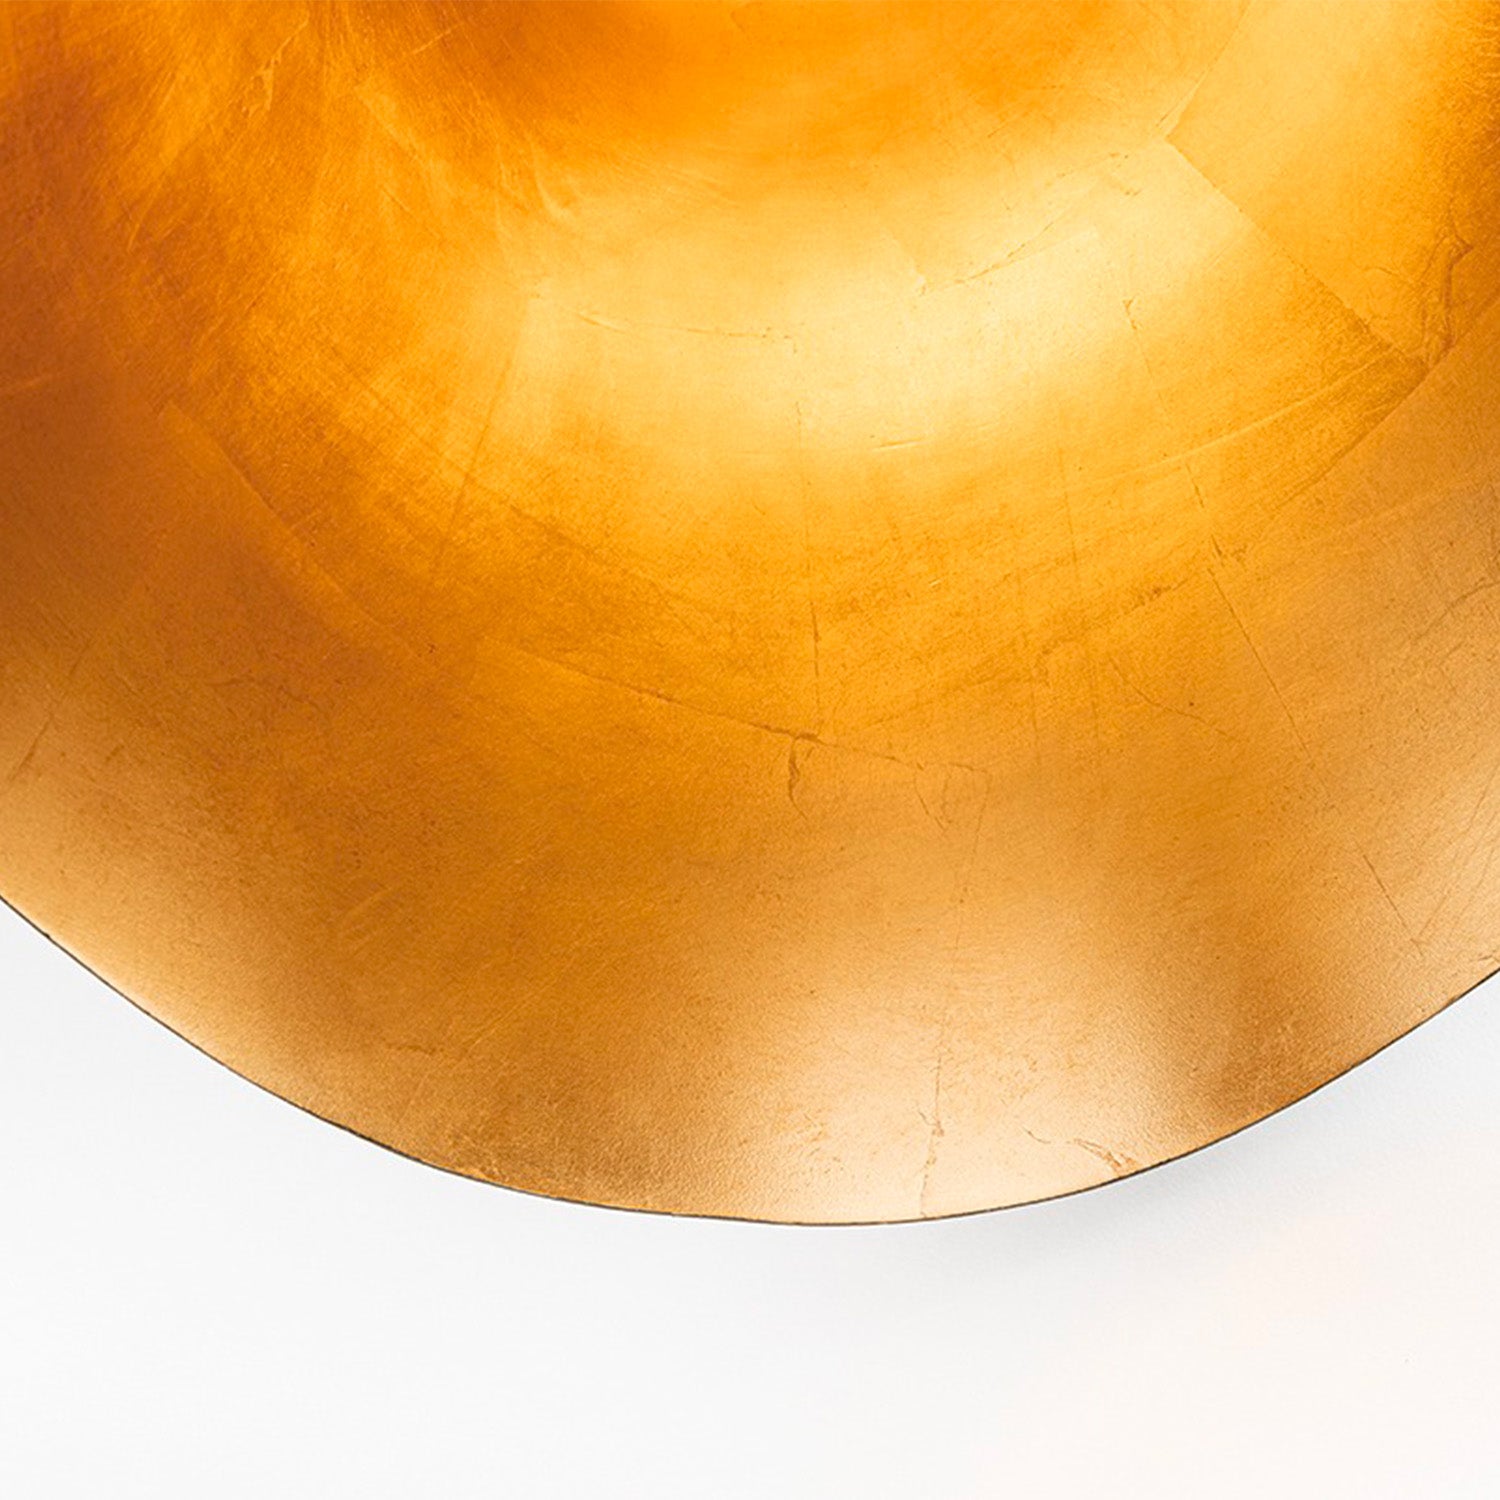 MARTINI - Conical pendant light in pure and white brass